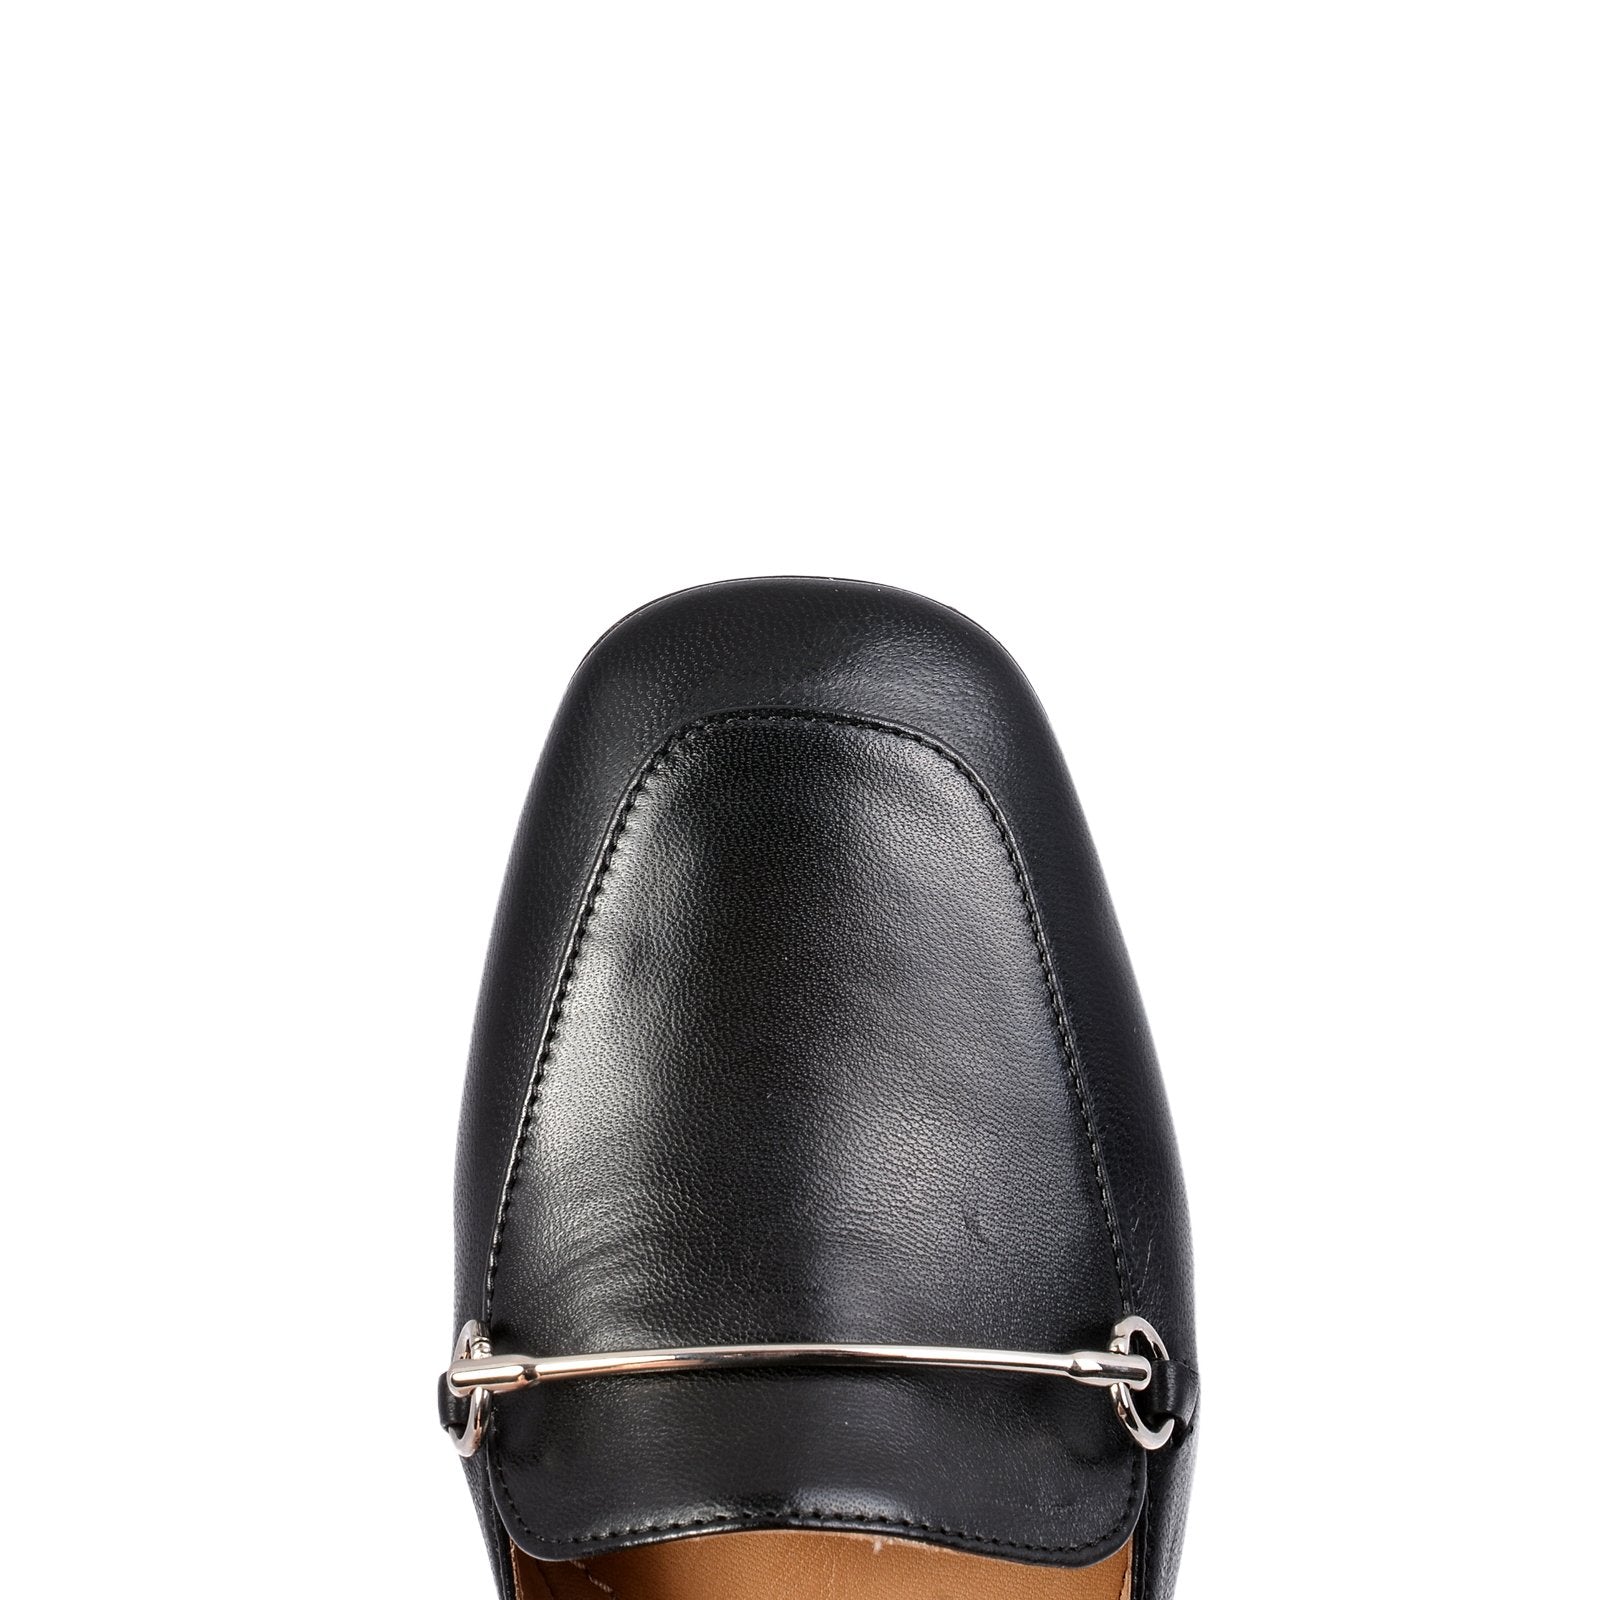 Lena Black Leather Loafers Flats 1144A - 6